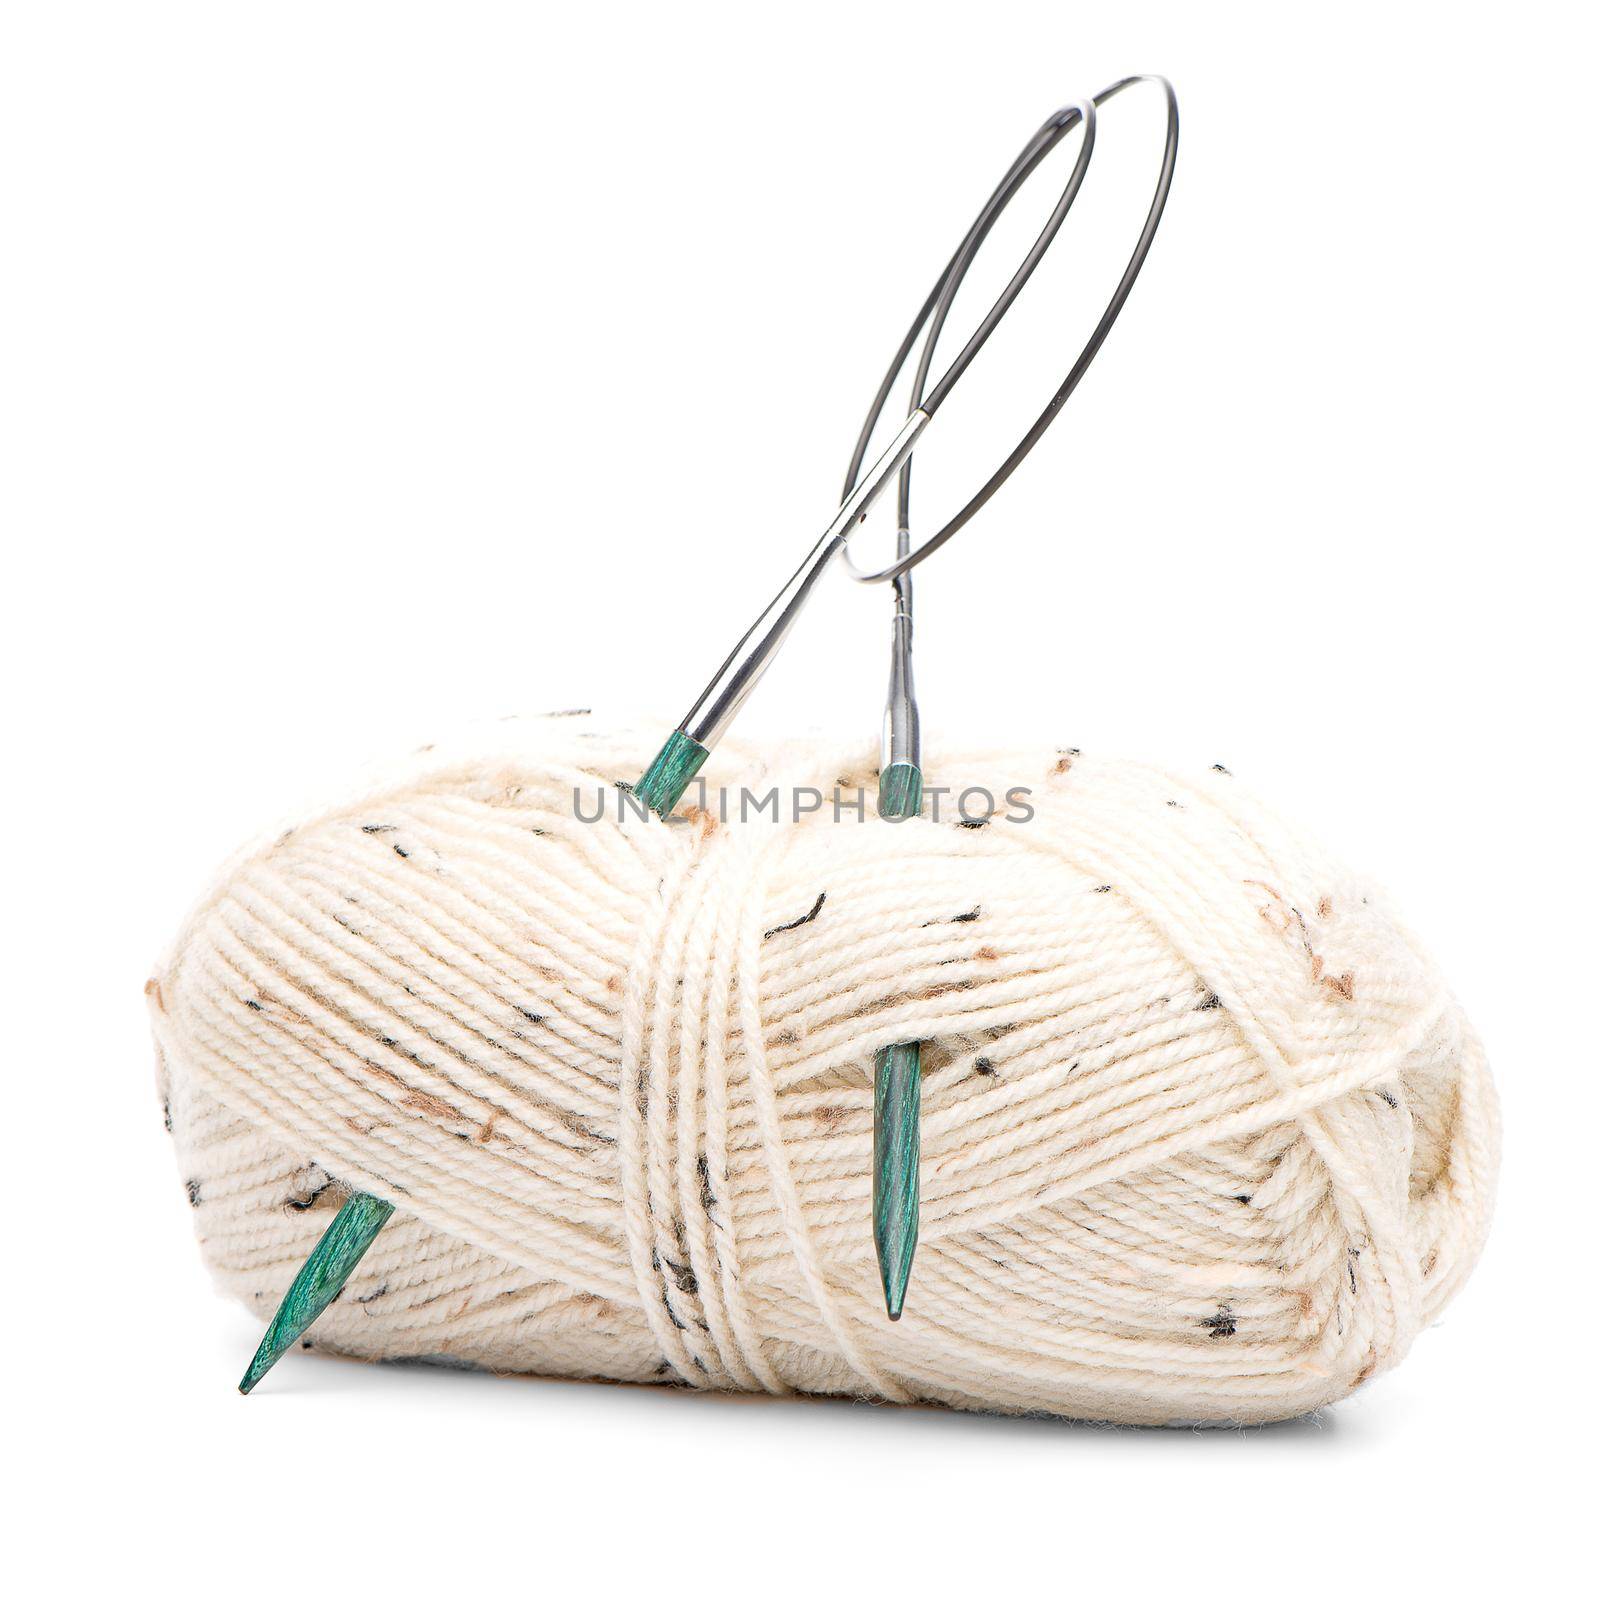 Beige knitting wool with needles by homydesign